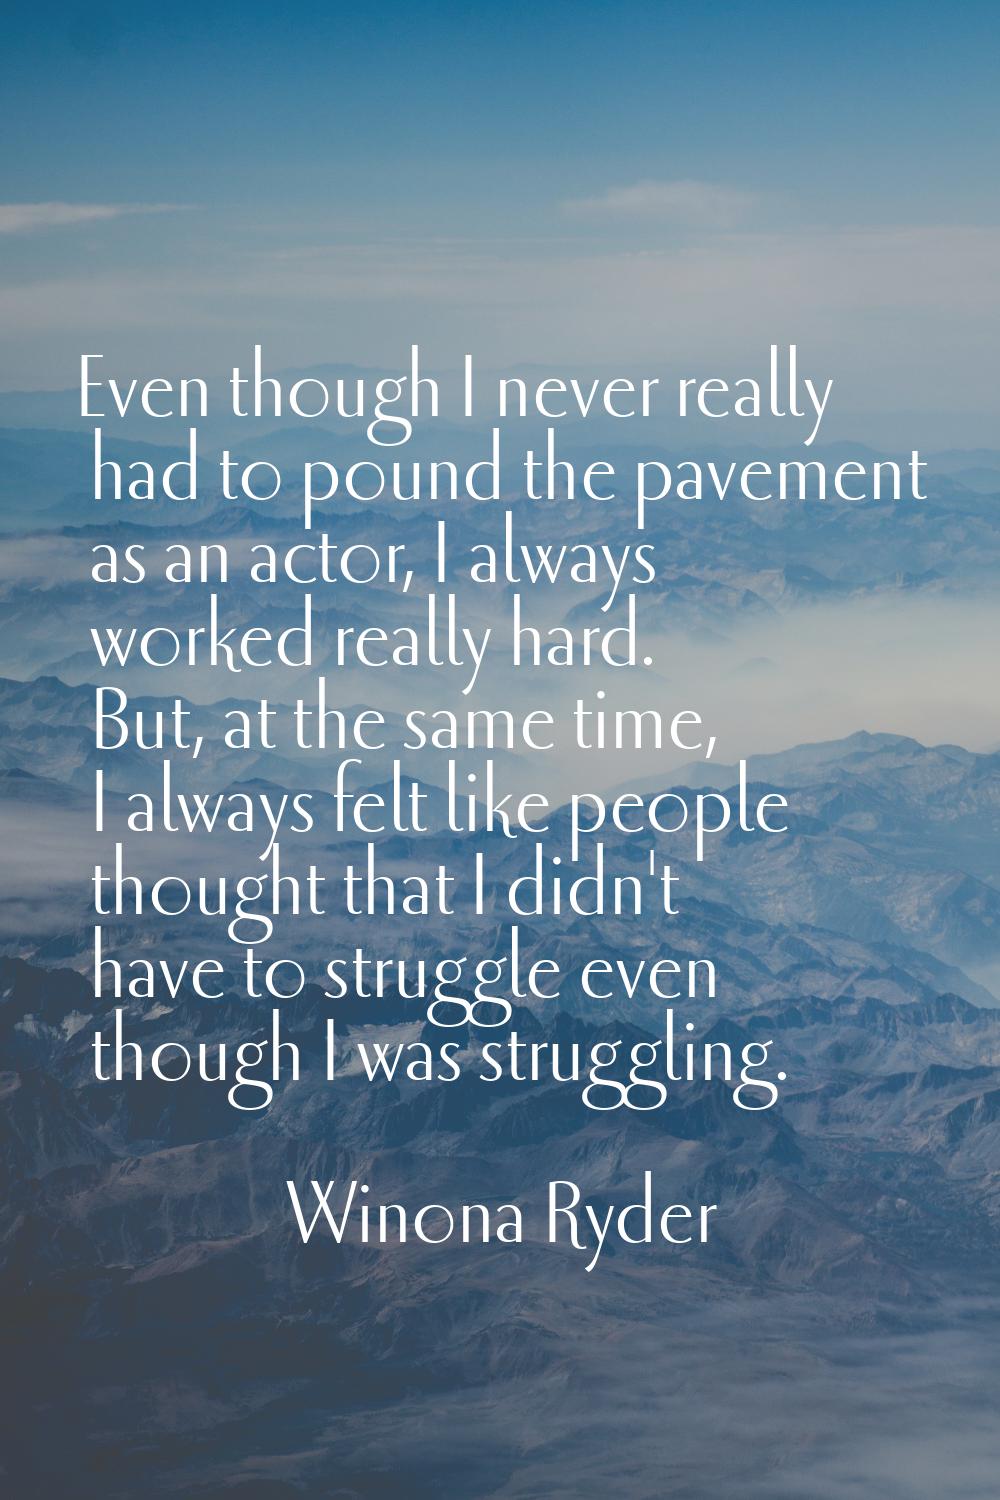 Even though I never really had to pound the pavement as an actor, I always worked really hard. But,